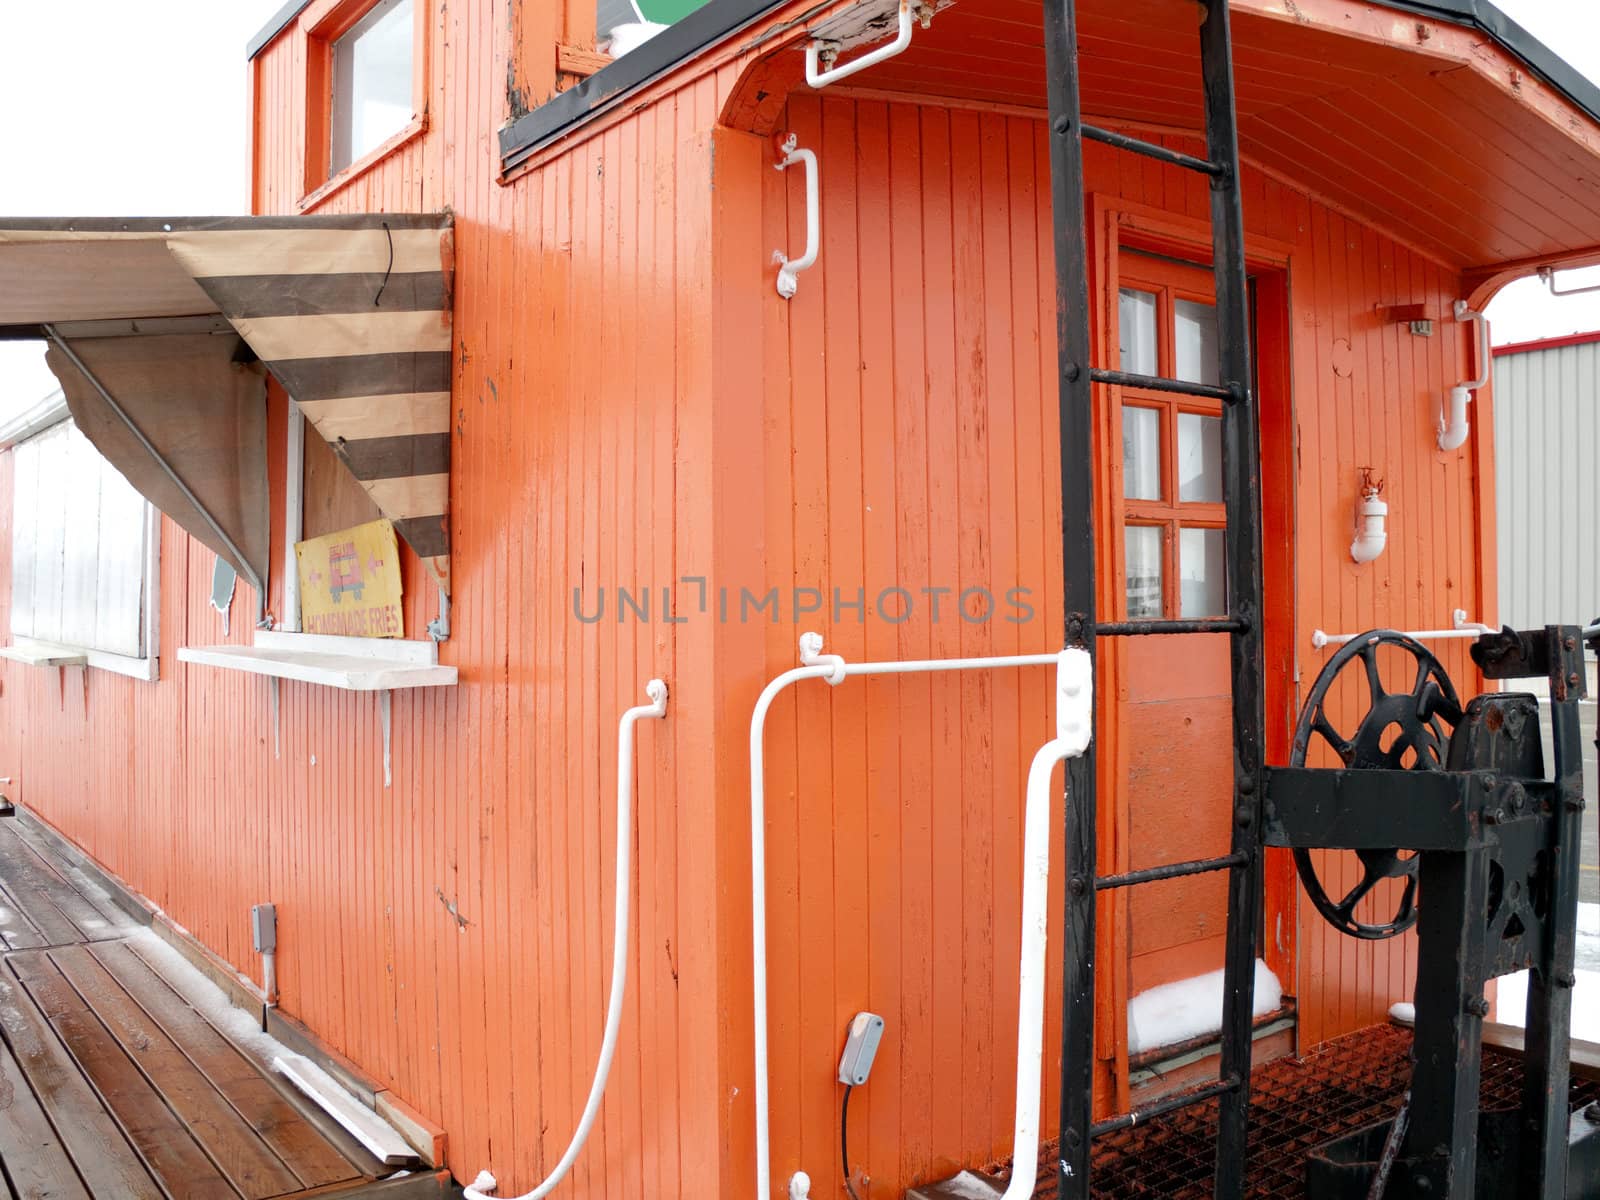 Train Caboose Conversion into restaurant by woodygraphs